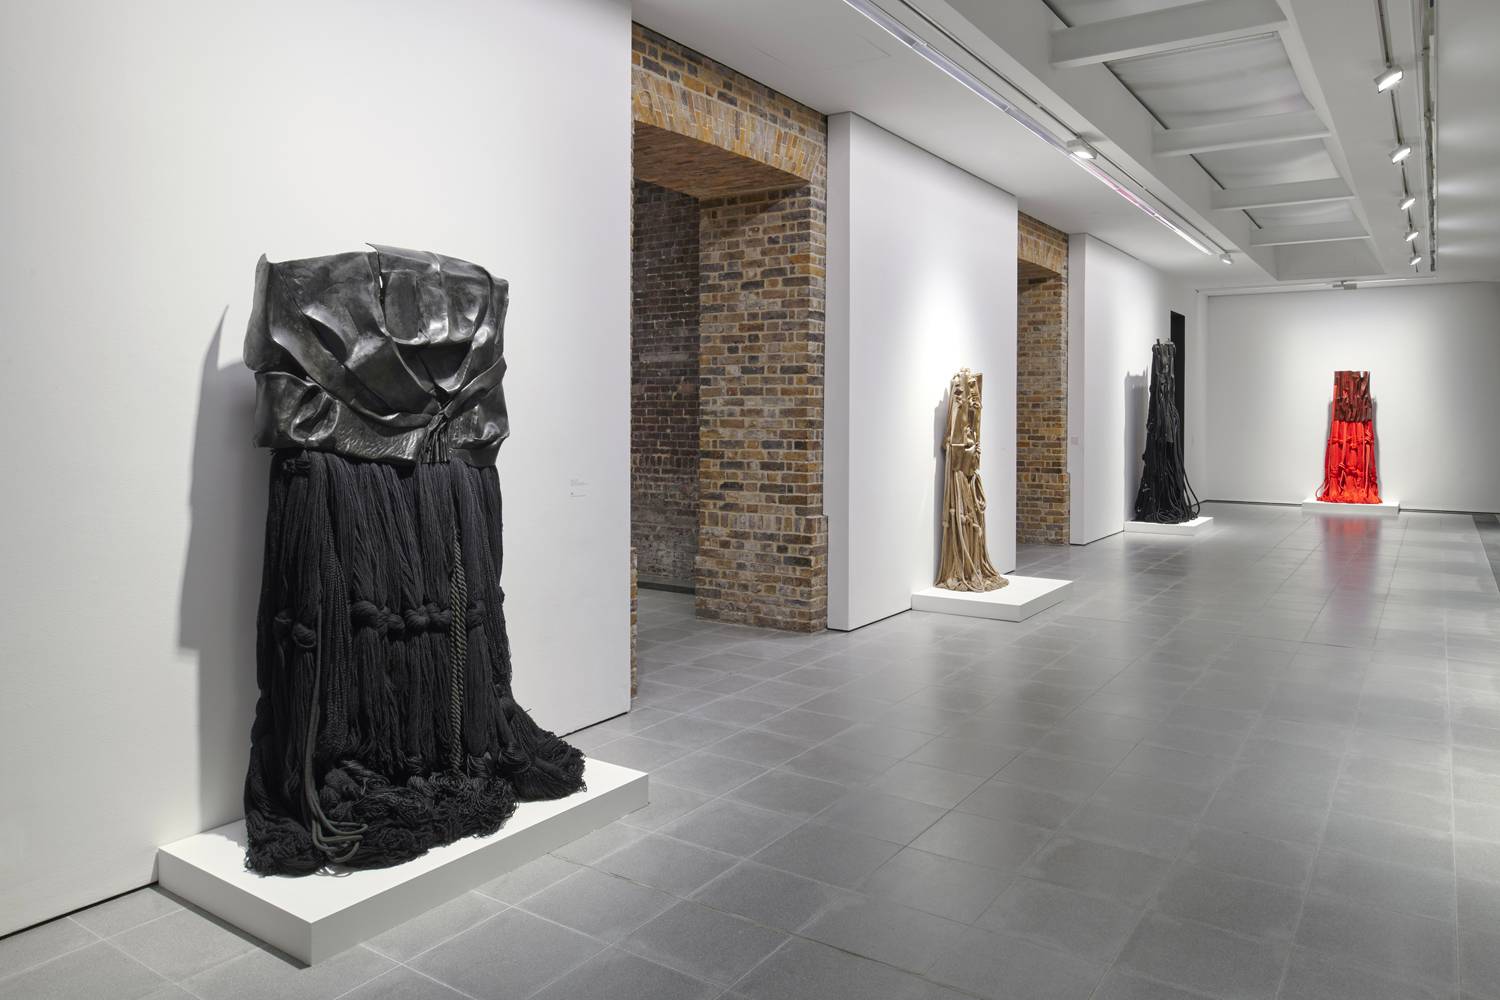 Installation view of Barbara Chase-Riboud’s exhibition ‘Infinite Folds’ at Serpentine North, London, 2022. Photograph by Jo Underhill. Courtesy of the artist and Serpentine.